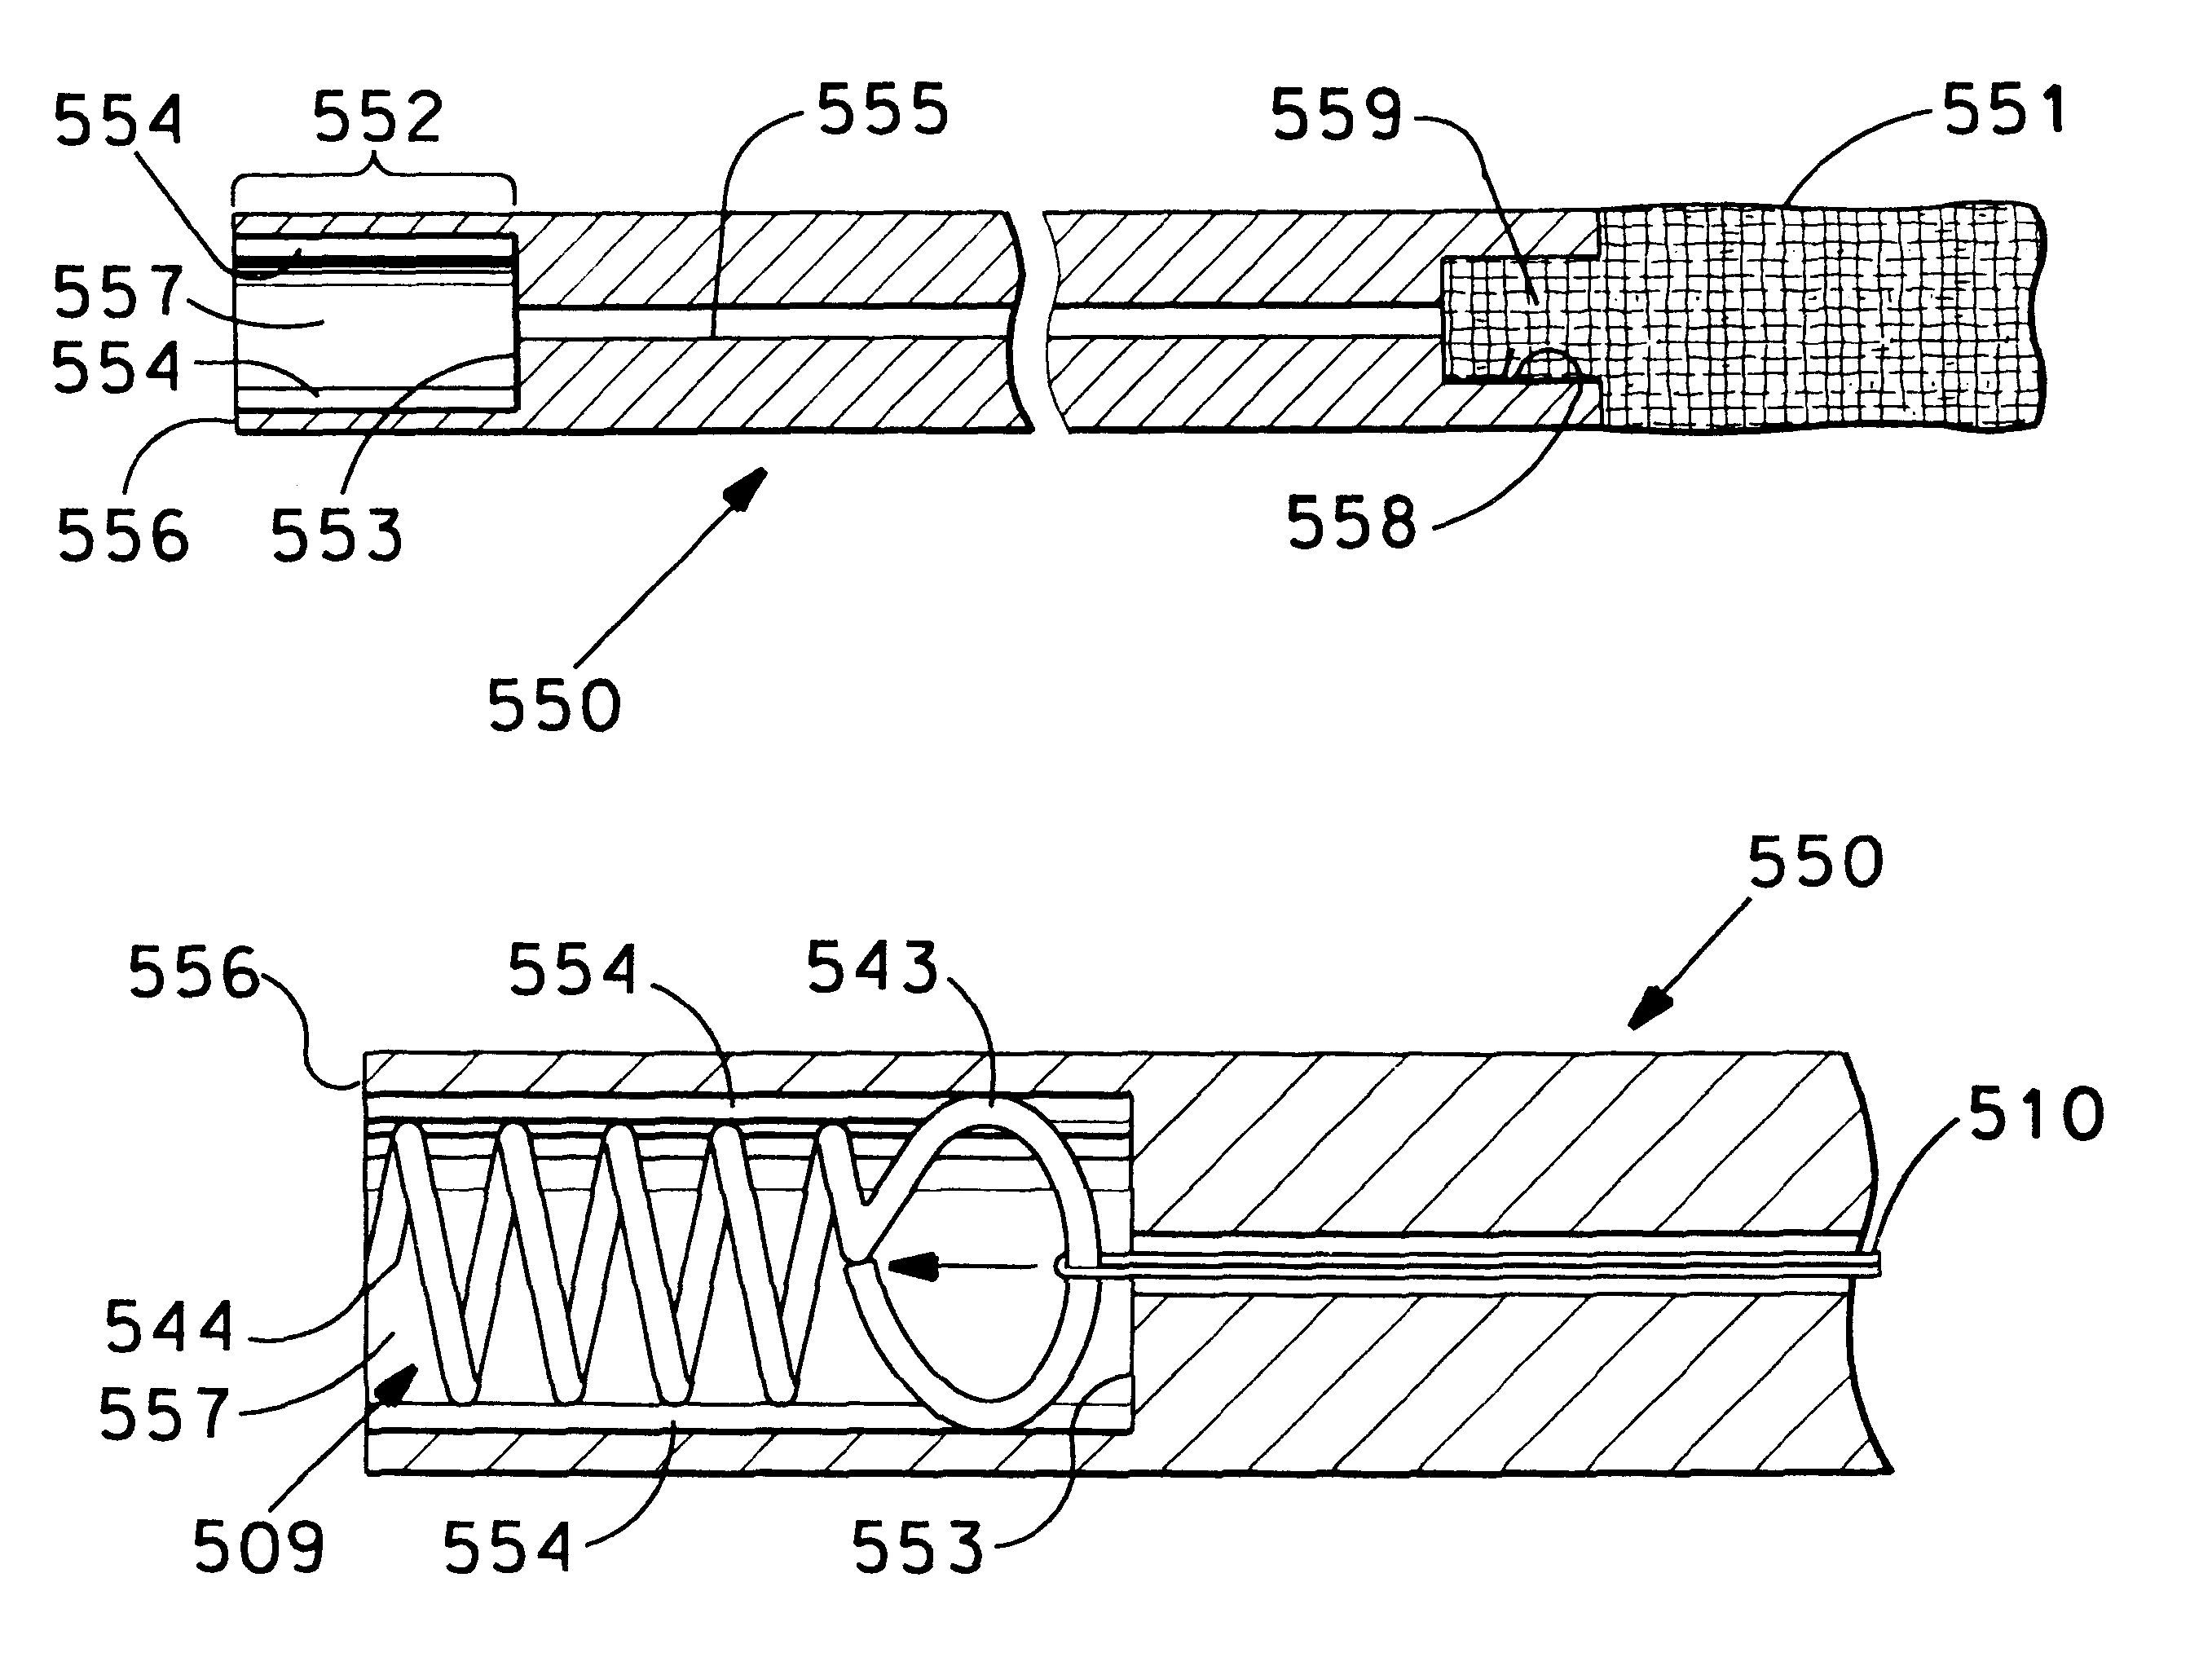 Surgical method for treating urinary incontinence, and apparatus for use in same